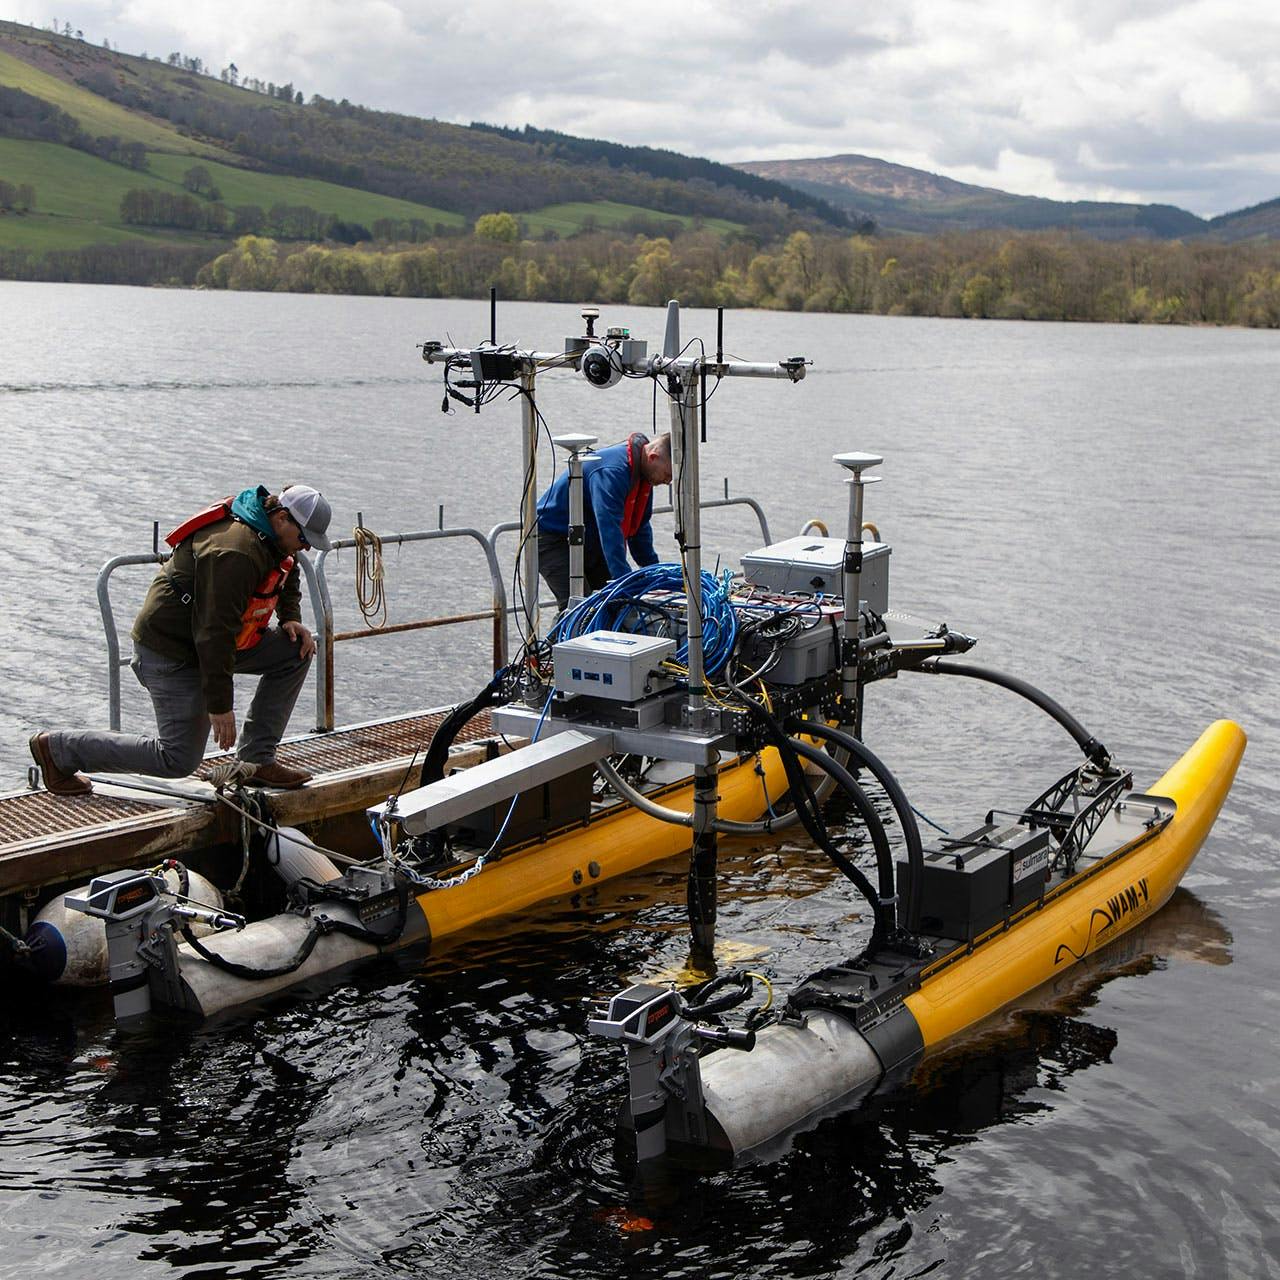 The photo of the OPT Wave Adaptive Modular Vehicle (WAM-V -16) was taken at the end of April 2023 at Loch Ness, Scotland, during trials on the loch to scan it using the UXO detecting technology.